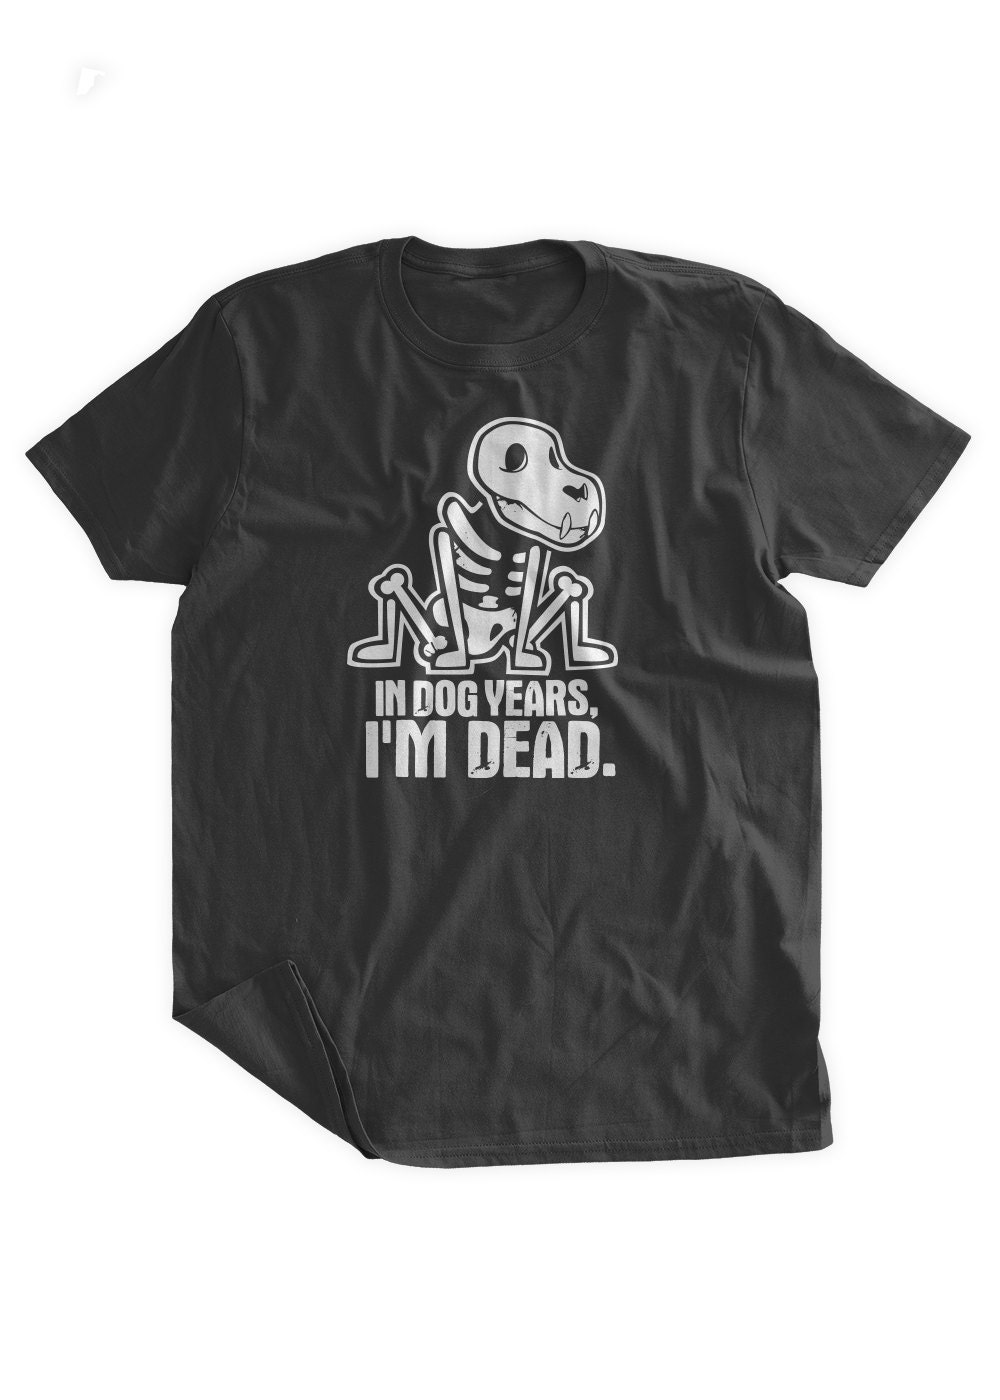 In Dog Years I'm Dead T-Shirt Funny Birthday Tshirt Over